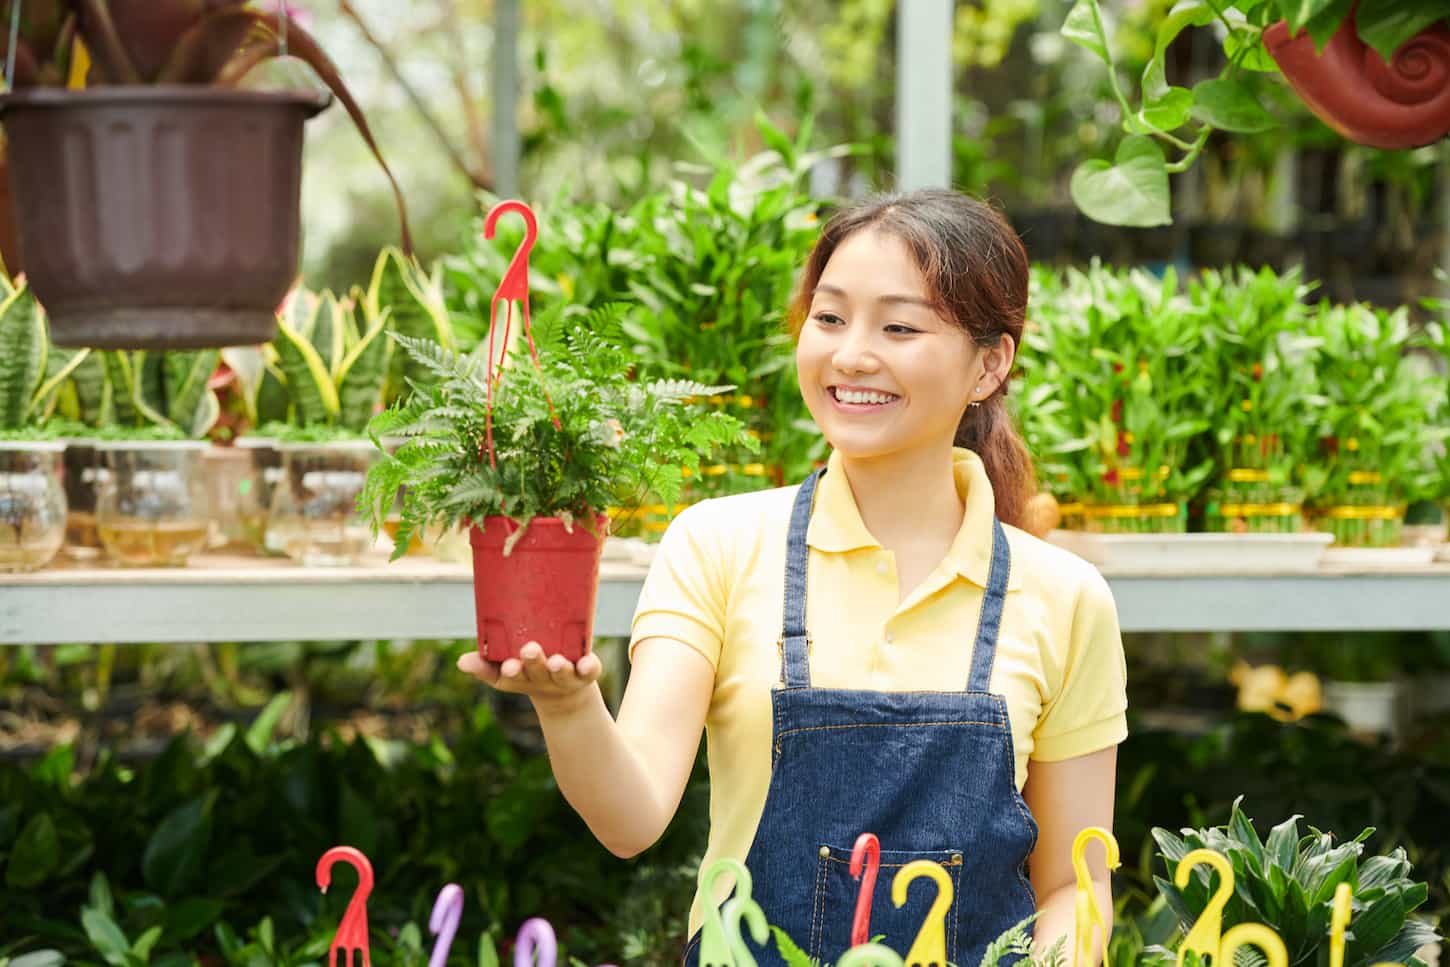 An image of a happy excited young woman looking at a fern plant in a pot with a hanger that is sold in the gardening center.